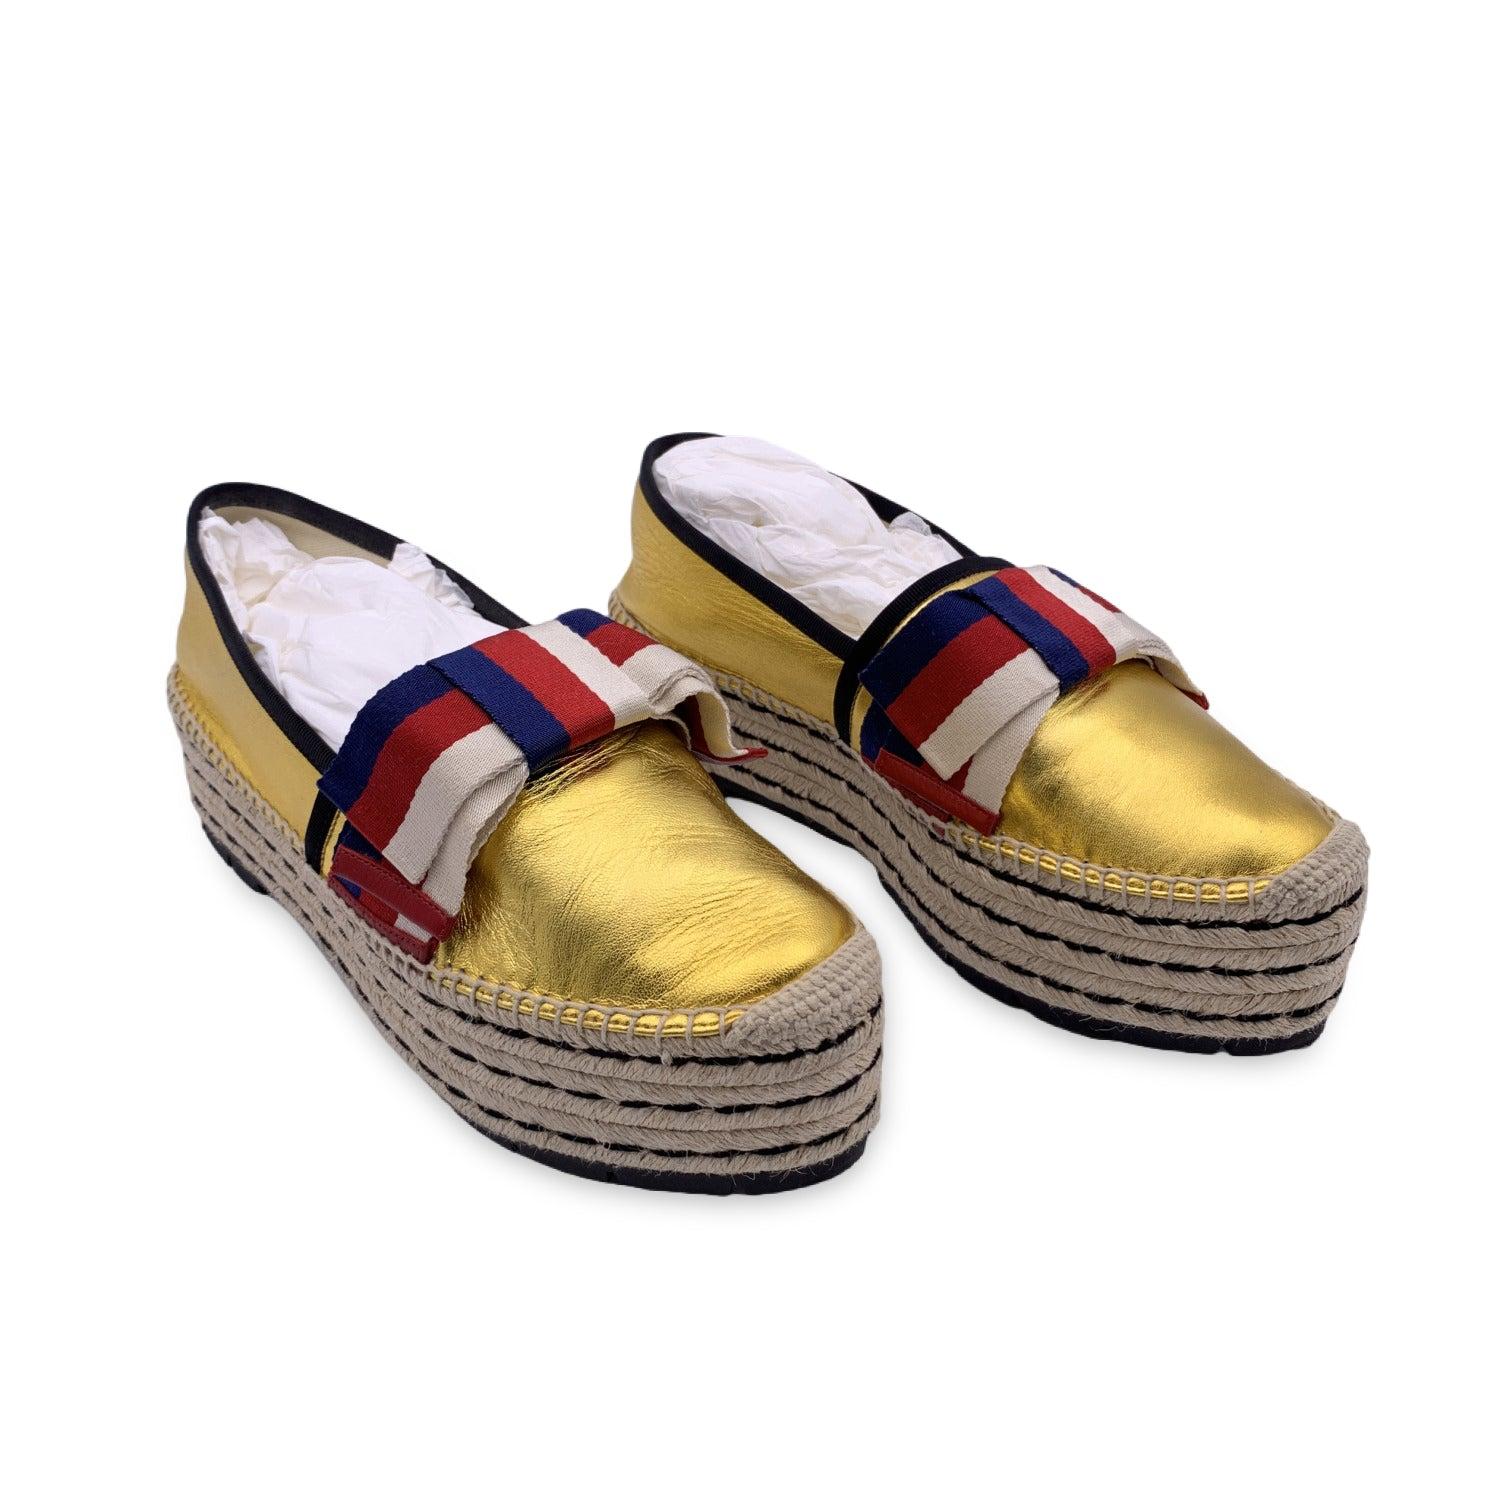 Gucci gold metal leather Espadrille shoes. These shoes are crafted from leather and feature round toes and a white, red and blue Web bow detail across the vamps. Platform height: 2 inches - 5.1 cm. Size 41 Details MATERIAL: Leather COLOR: Gold